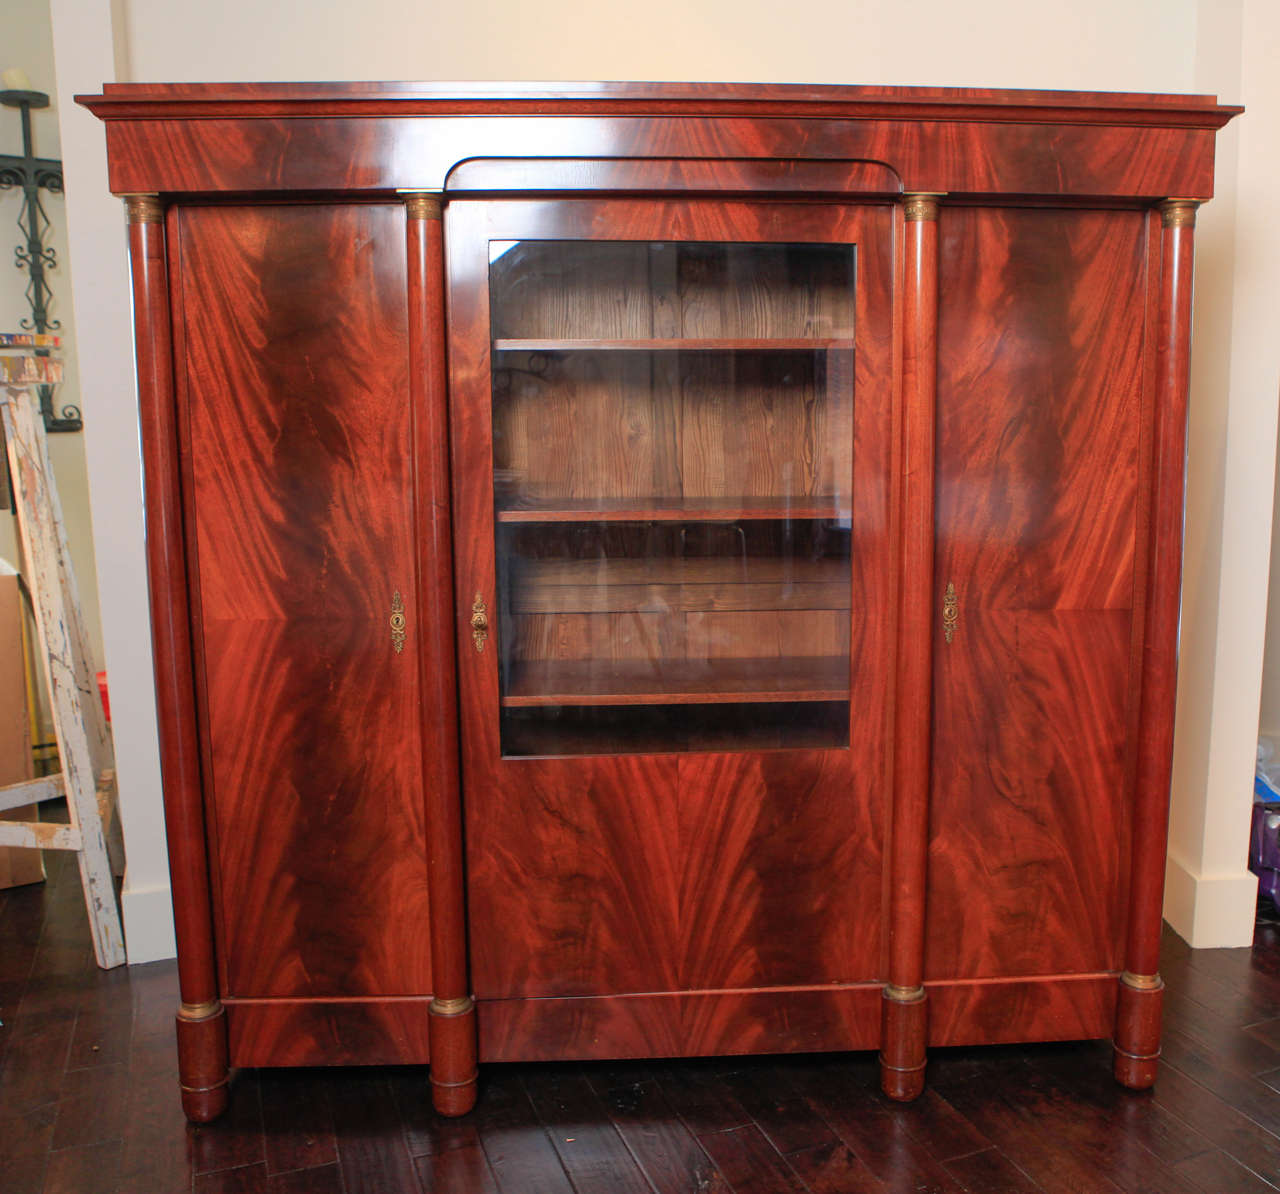 Armoire has bronze hardware. Locking doors; one door has glass. Four adjustable moveable shelves and one stationary shelf. Bookend matched mahogany veneer.